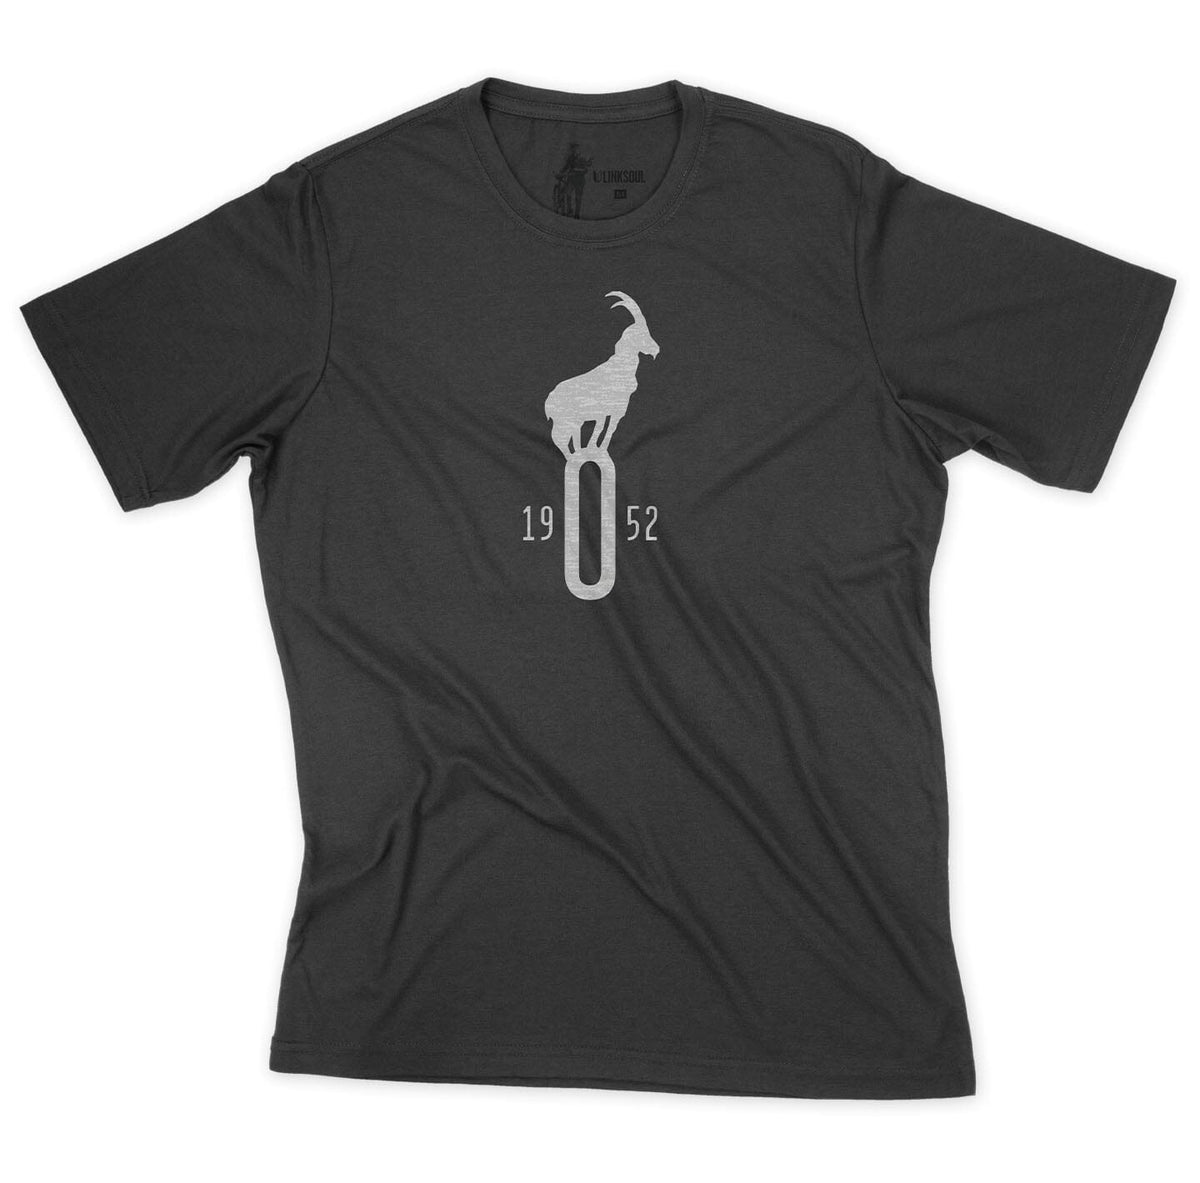 The Goat Hill Park Lite Tee